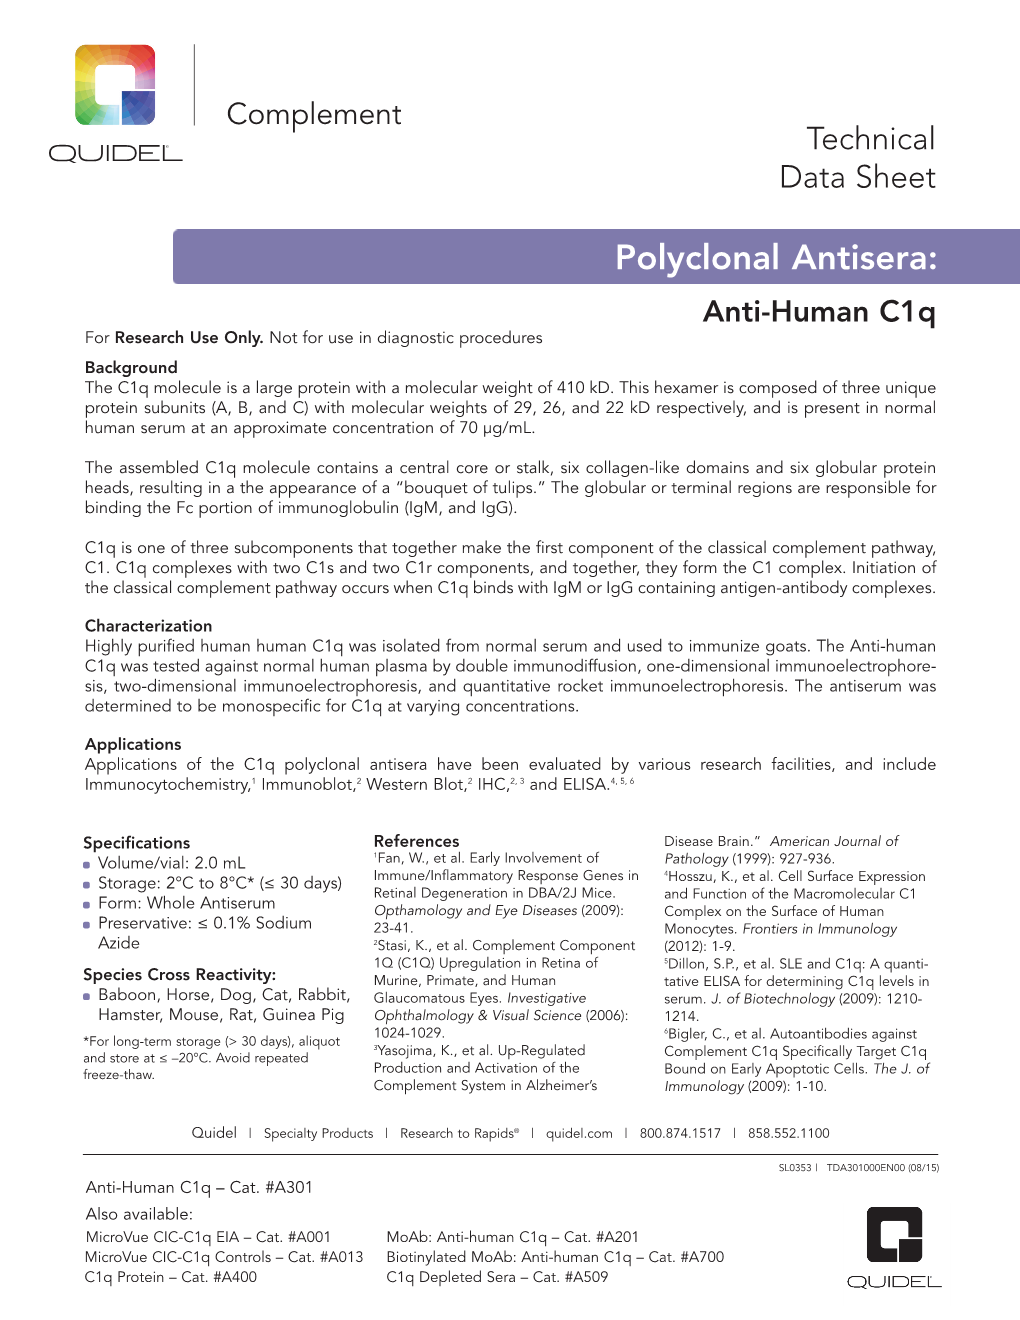 Polyclonal Antisera: Anti-Human C1q for Research Use Only